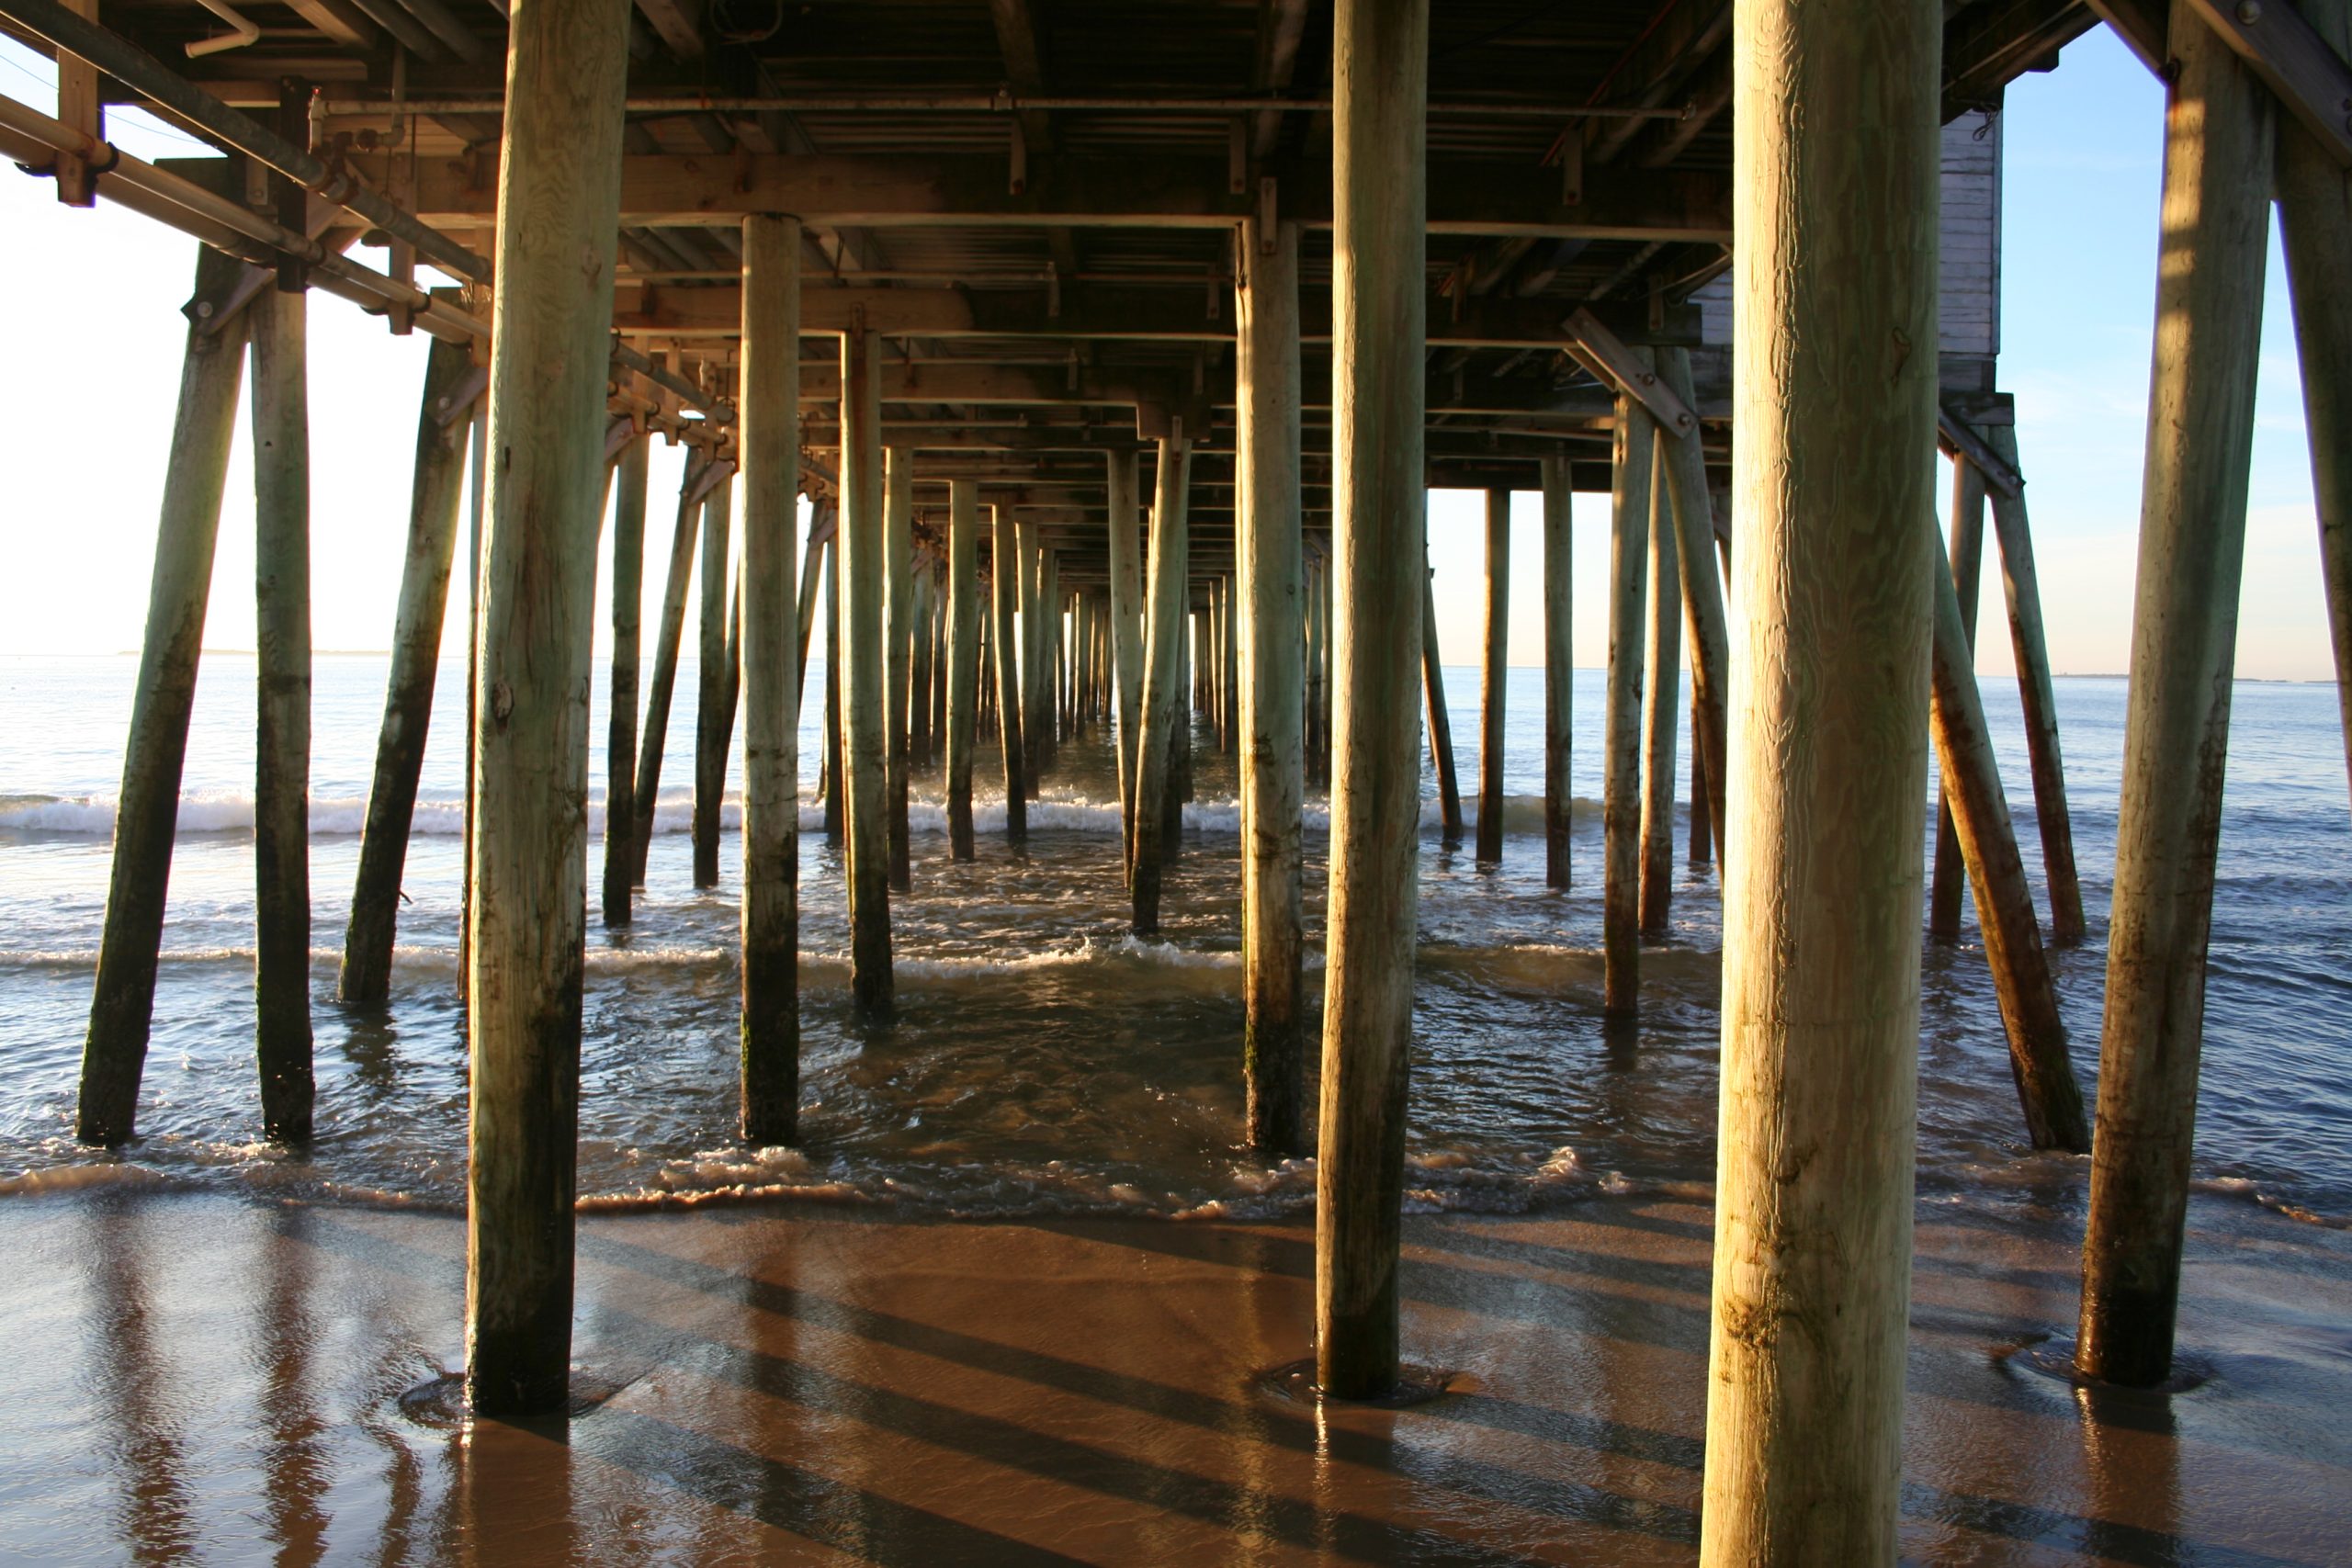 View from under the Pier (user submitted)